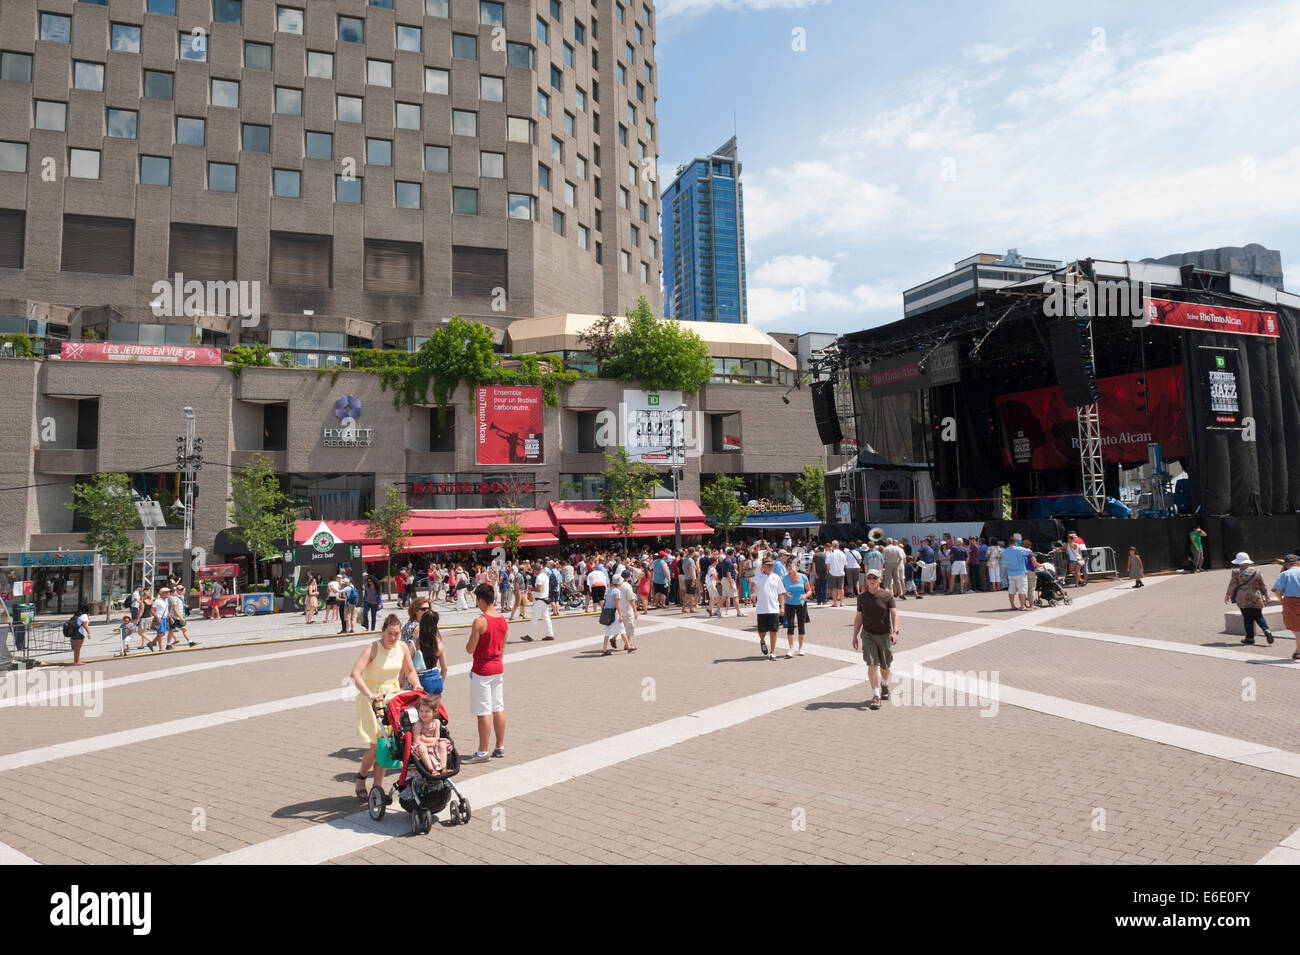 Crowd on Place des Festivals during the Montreal Jazz festival. Stock Photo